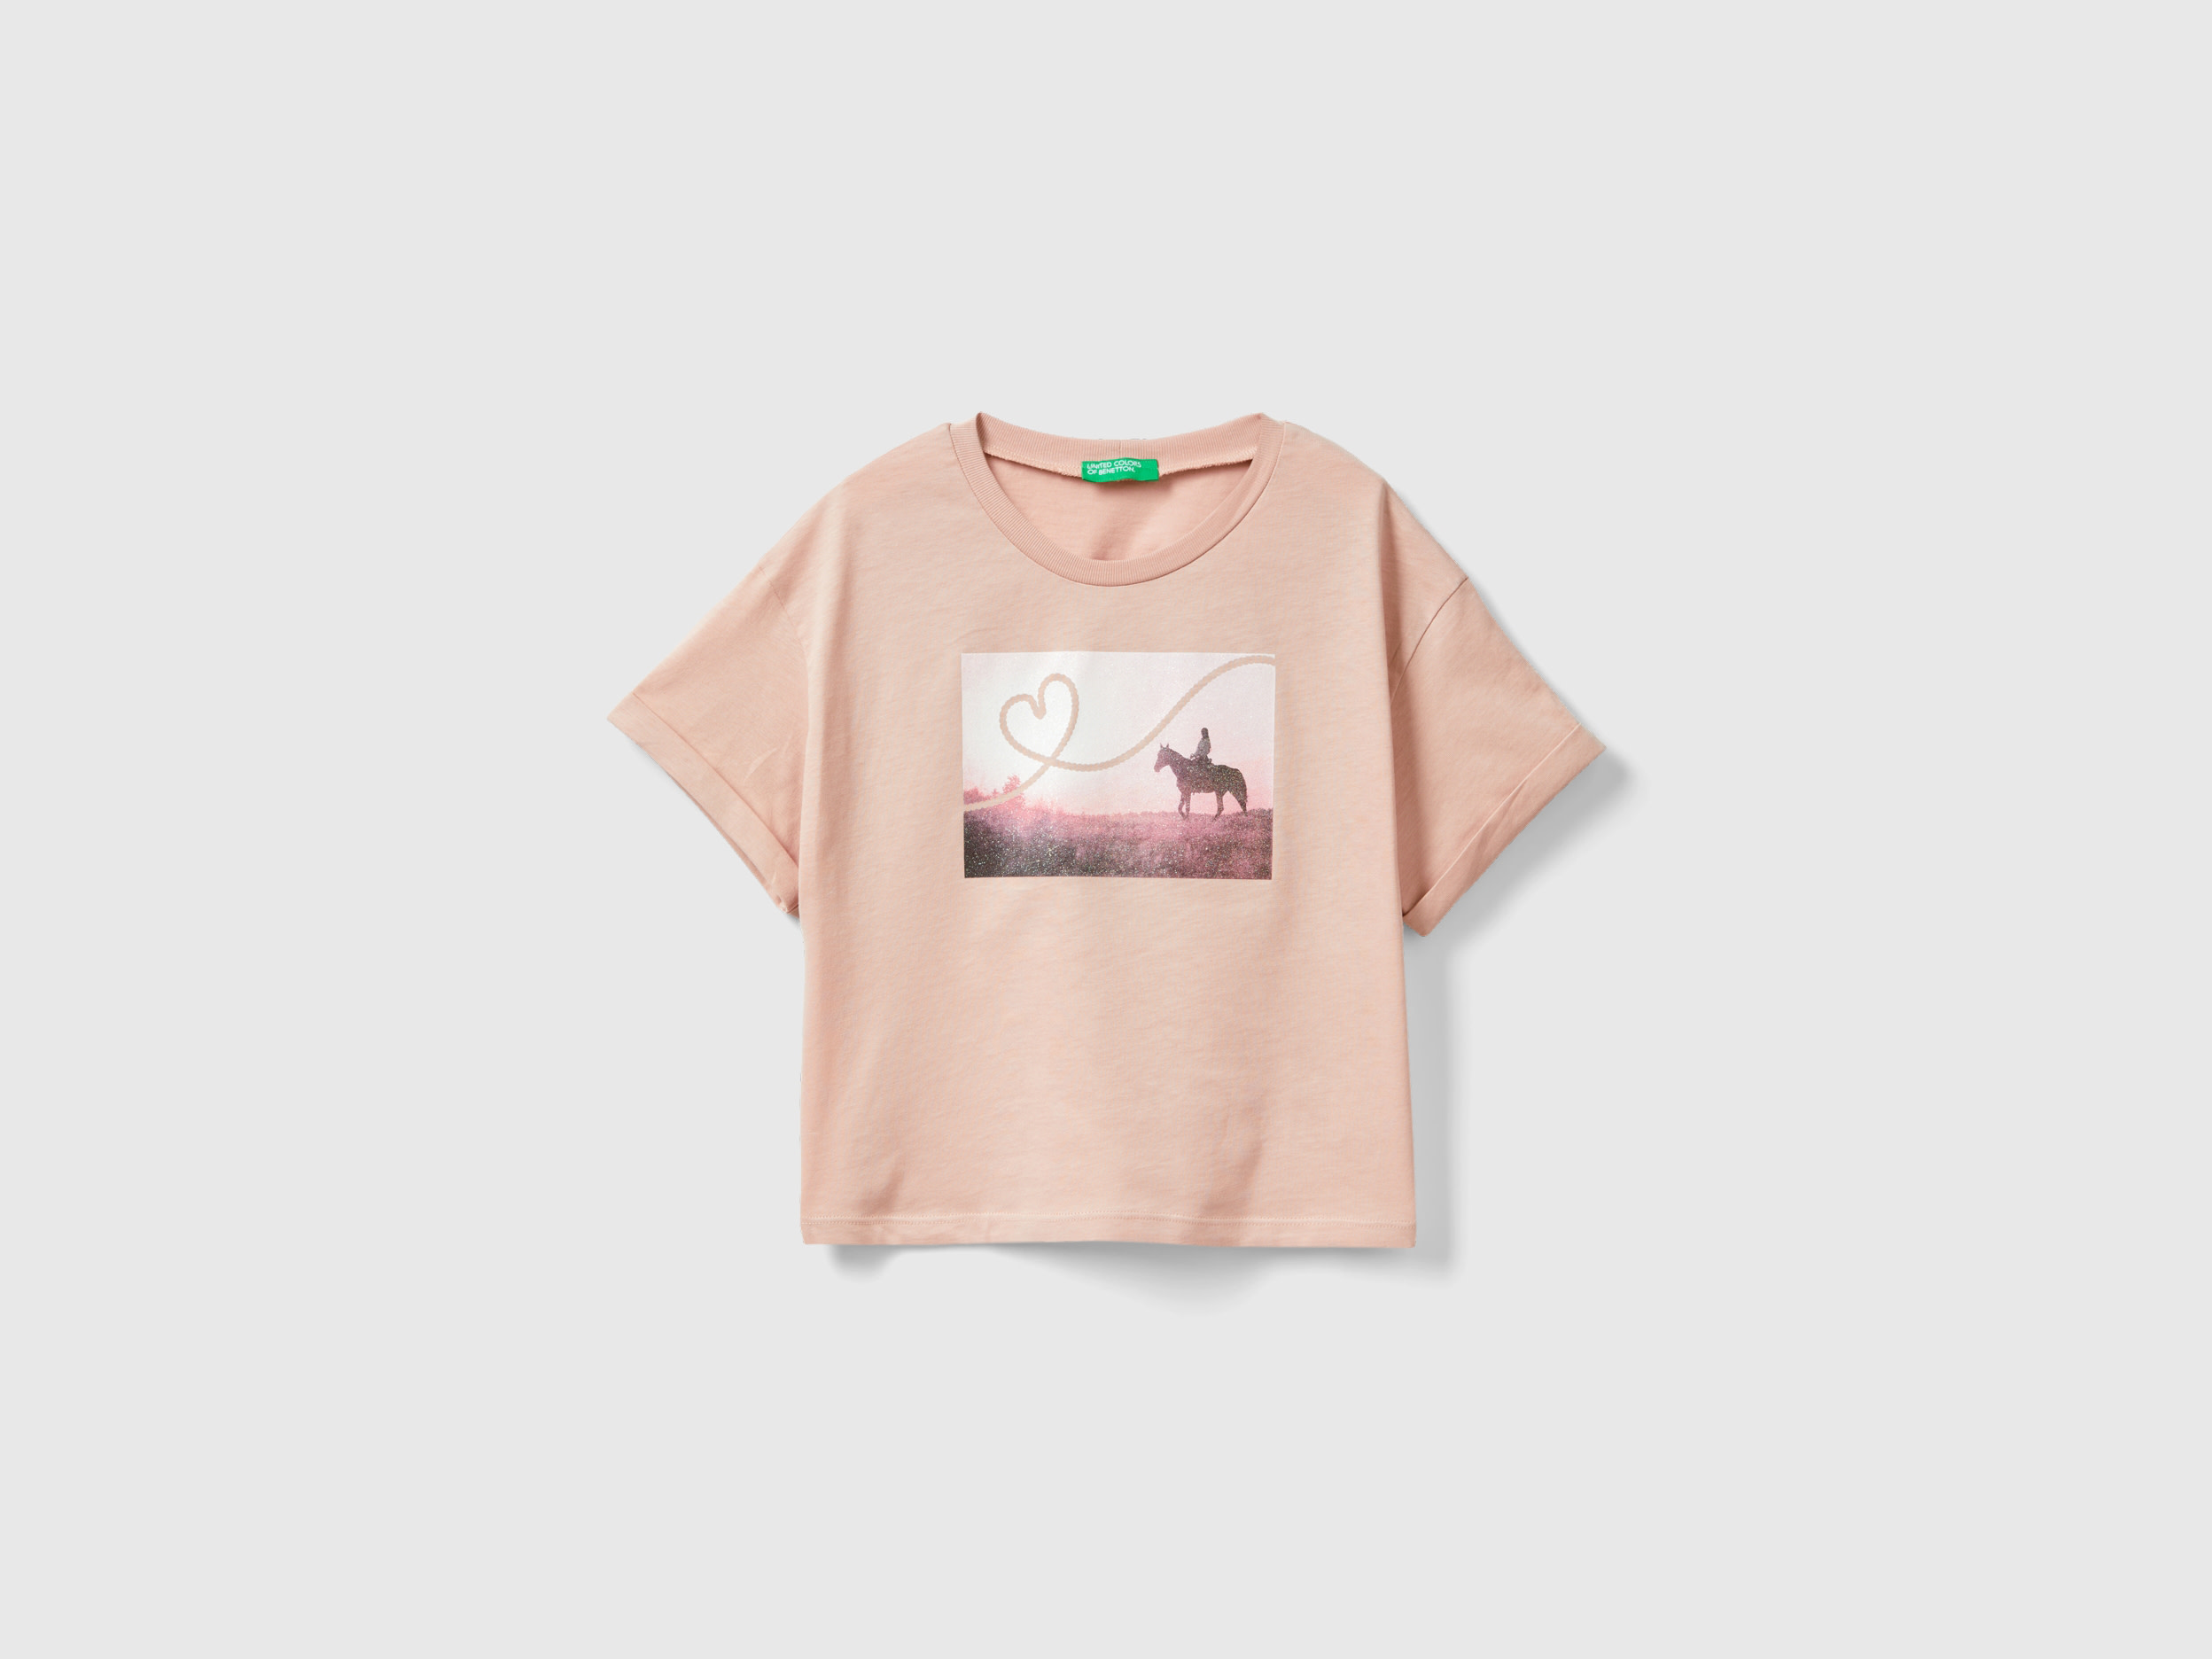 Image of Benetton, T-shirt With Photographic Horse Print, size 2XL, Soft Pink, Kids